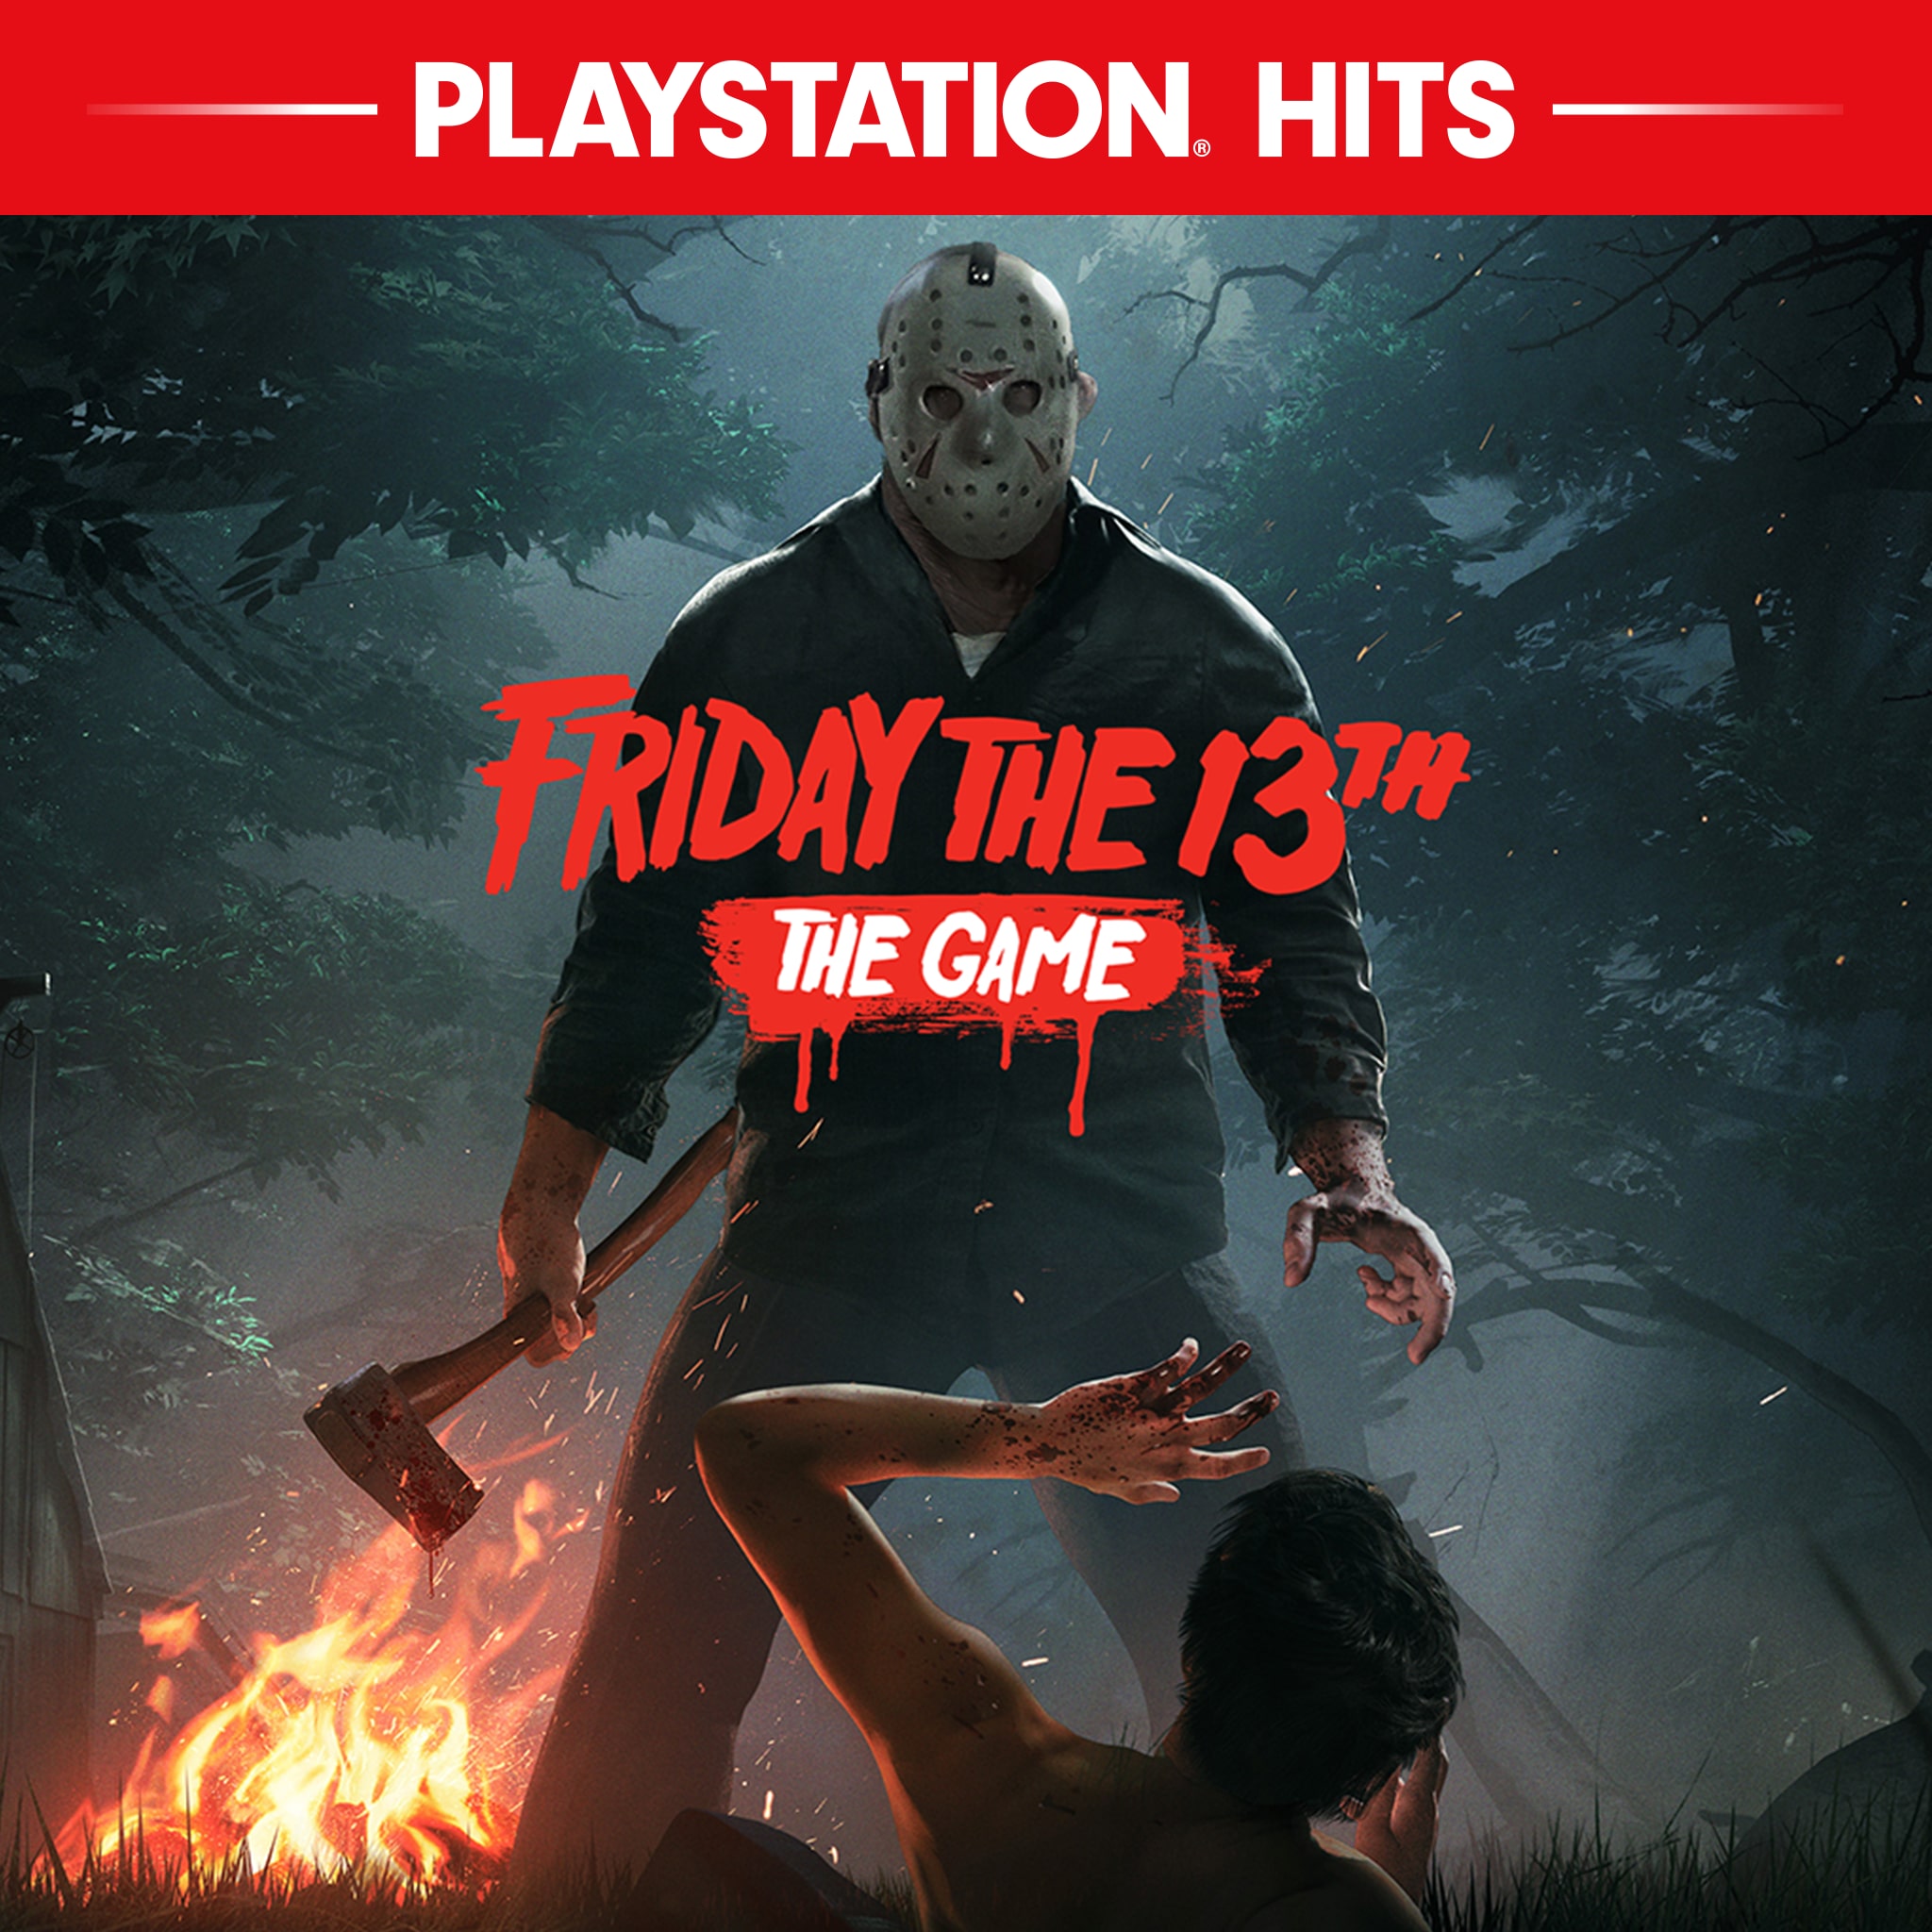 marmorering stakåndet morbiditet Friday the 13th: The Game